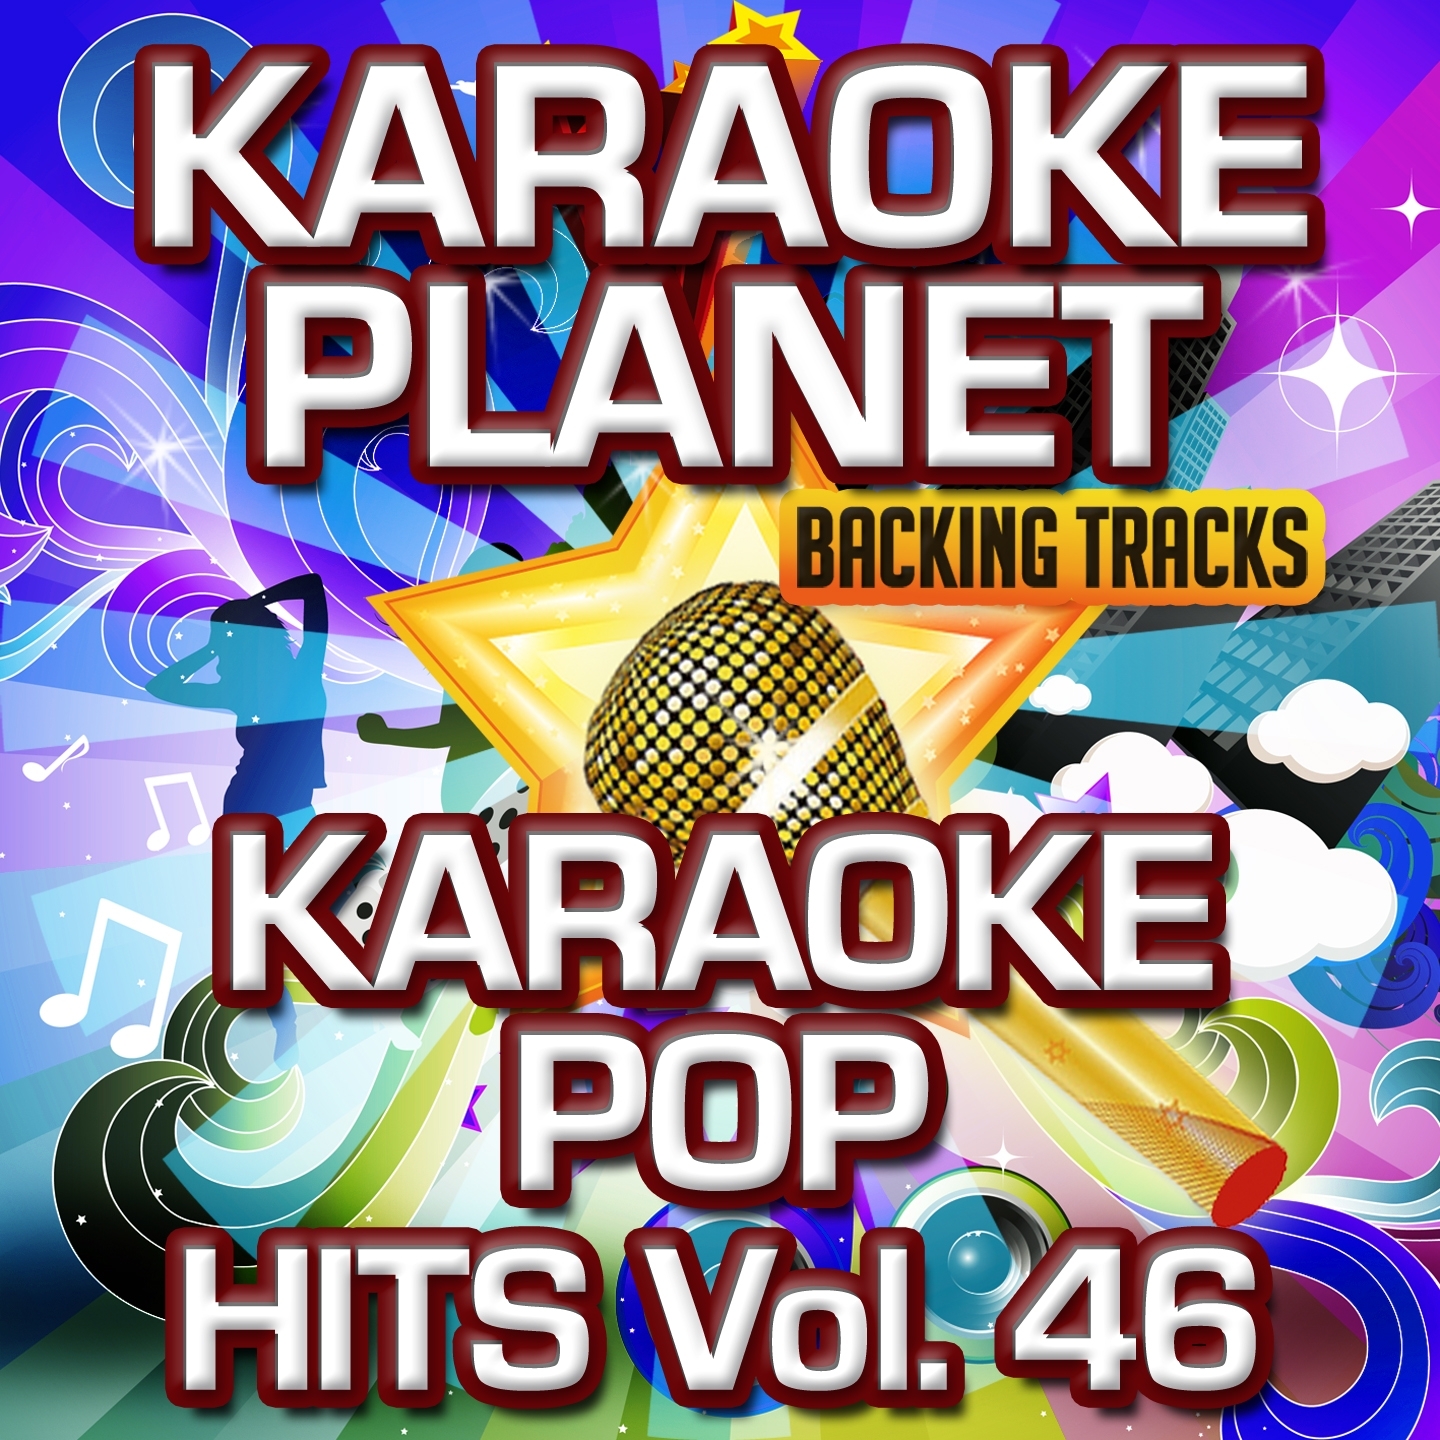 Every Moment of My Life (Karaoke Version) (Originally Performed By Sarah Connor)